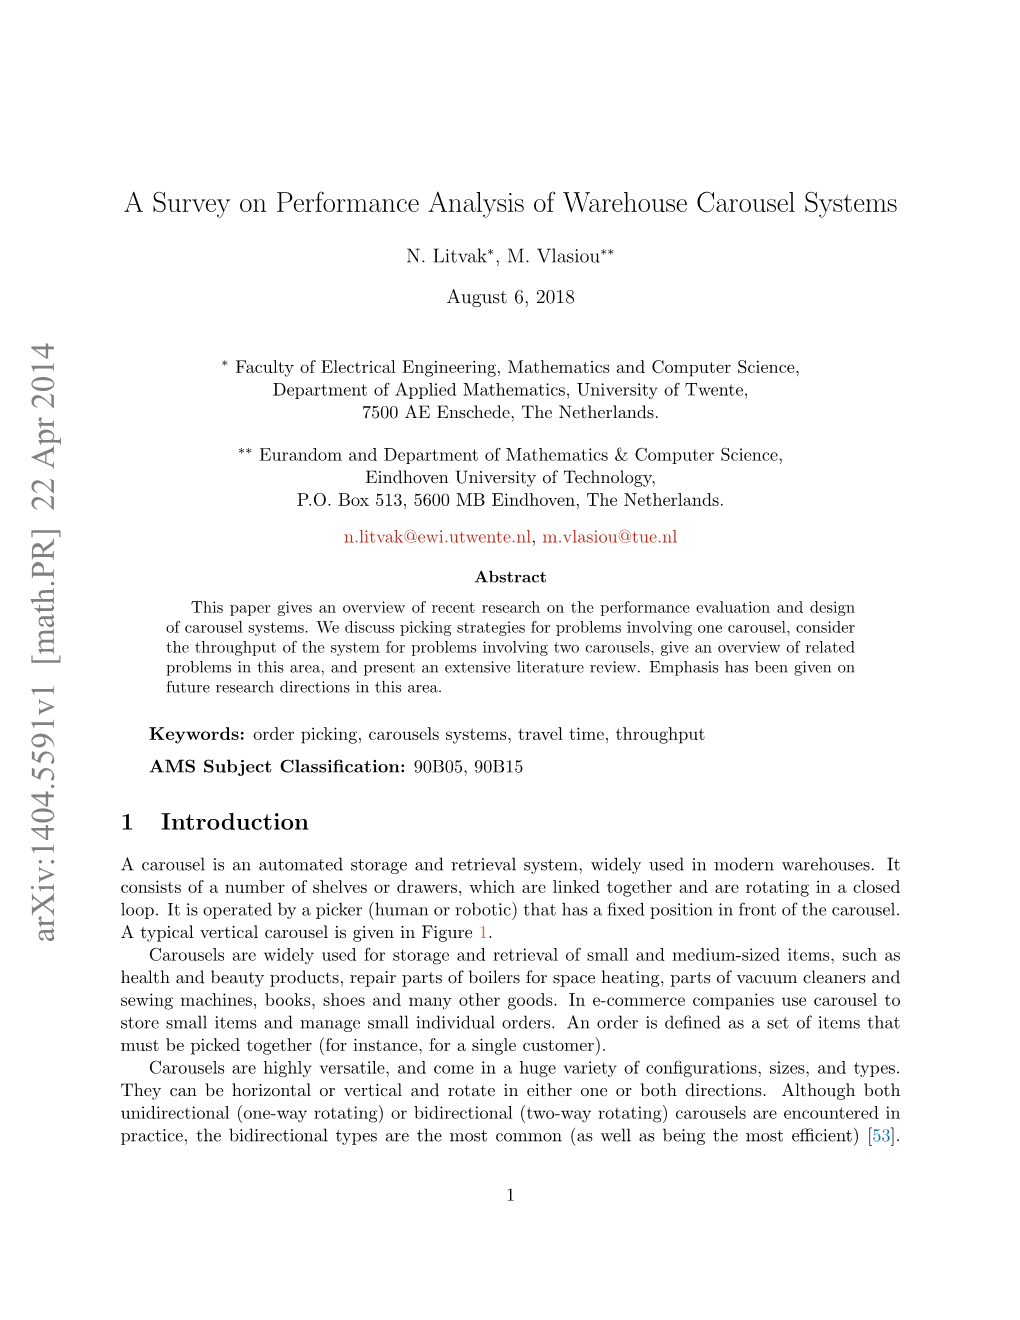 A Survey on Performance Analysis of Warehouse Carousel Systems